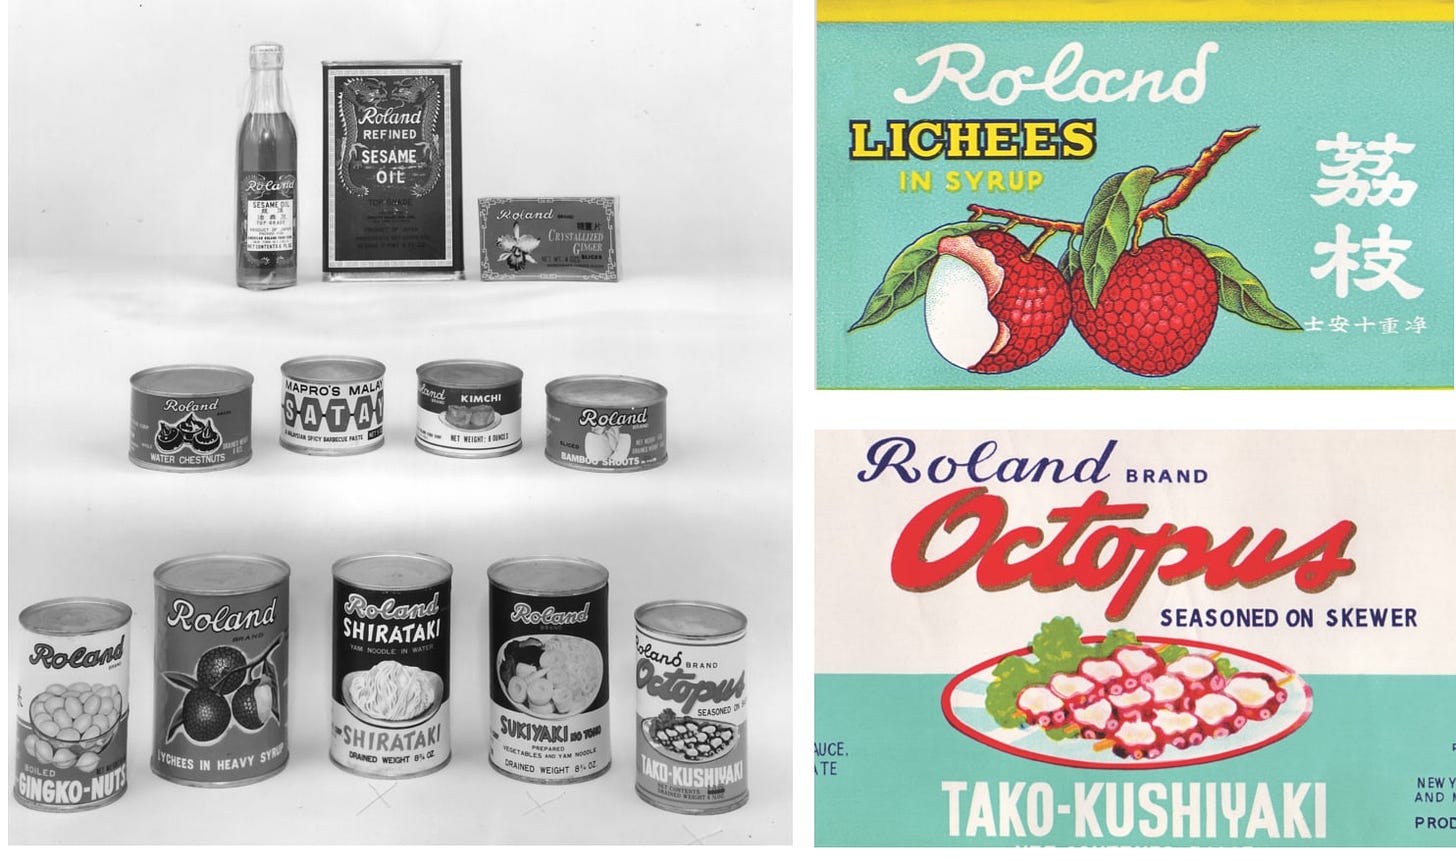 Can labels from the 1940s and 1950s